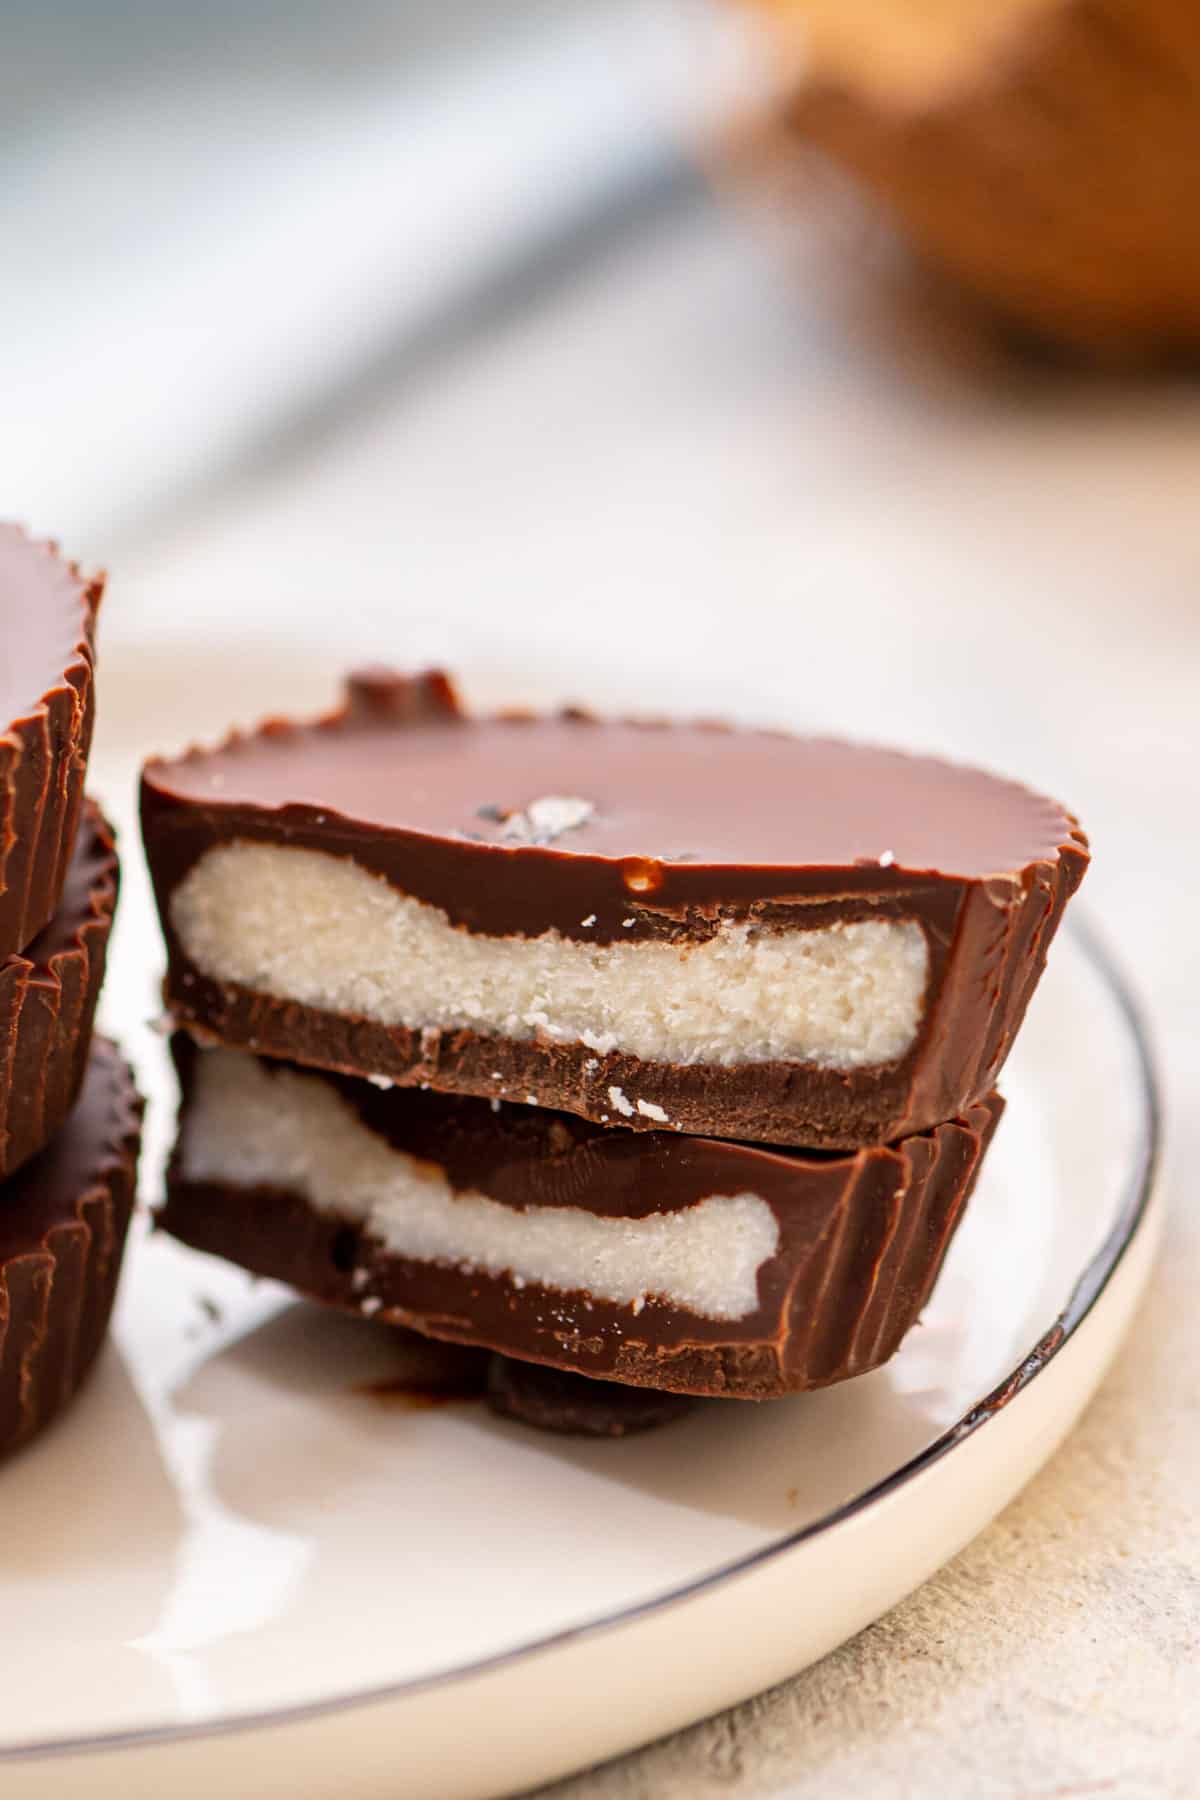 Two mint coconut butter cups cut in half.